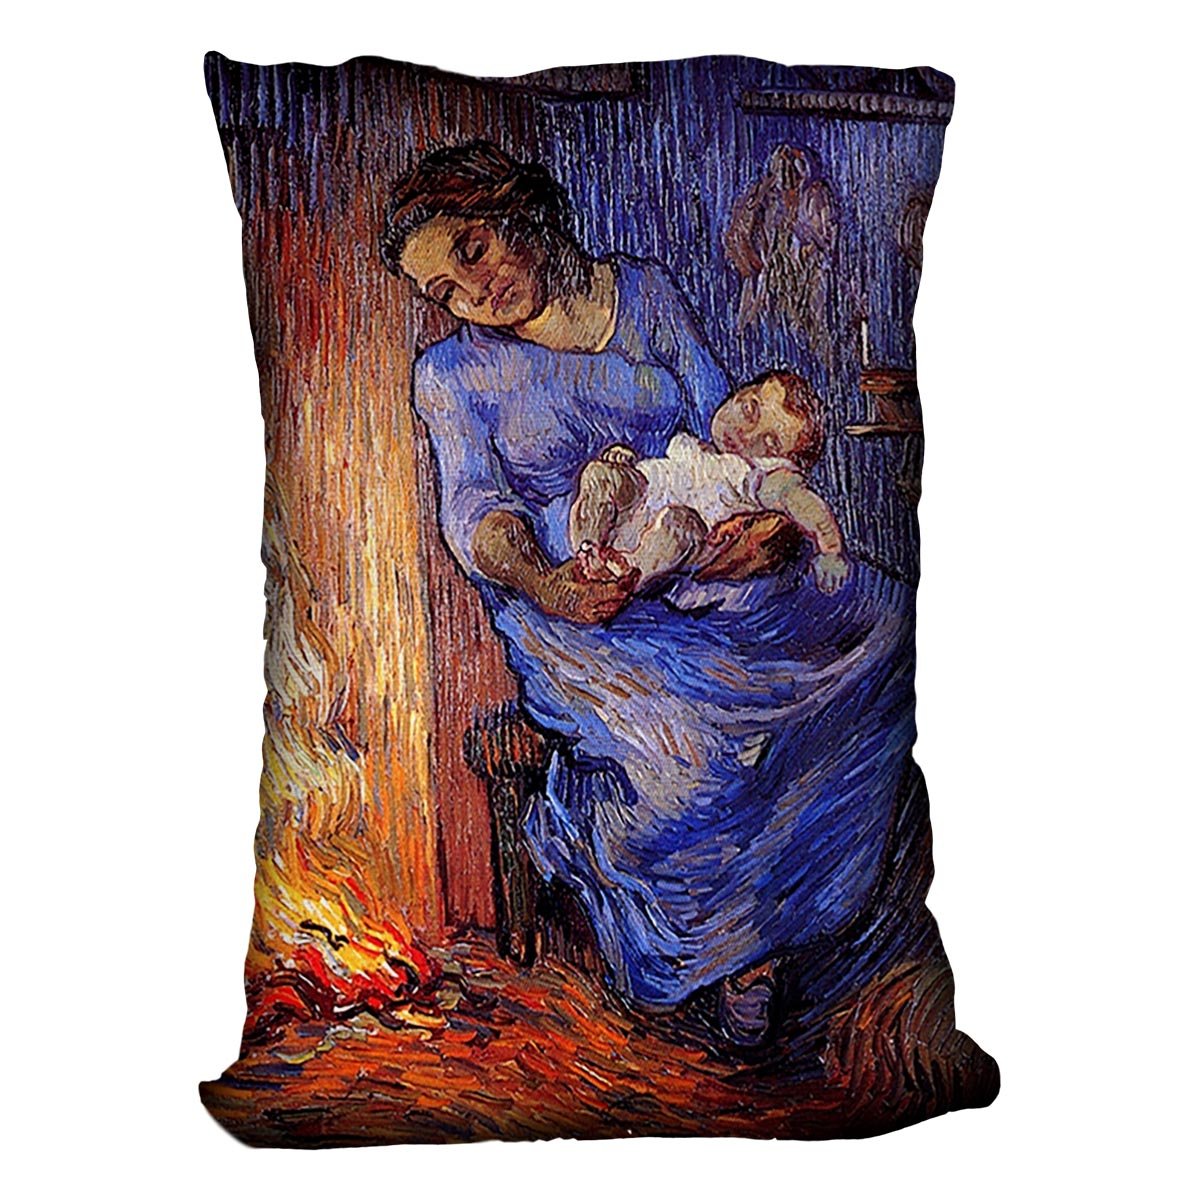 The Man is at Sea after Demont-Breton by Van Gogh Throw Pillow